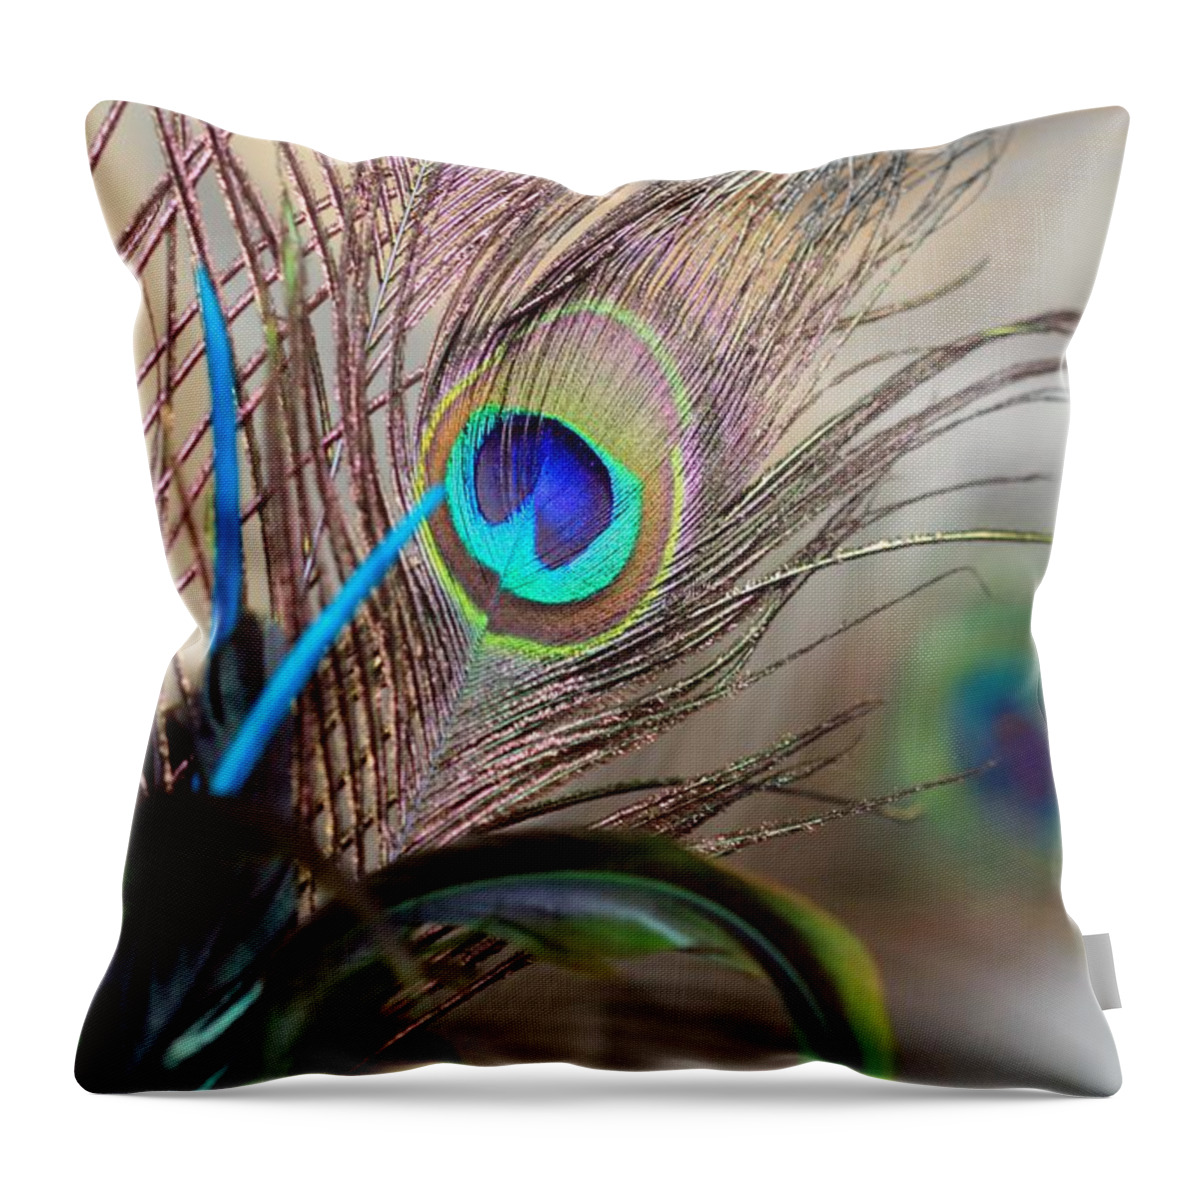 Peacock Feathers Throw Pillow featuring the photograph Colorful Feathers by Angela Murdock